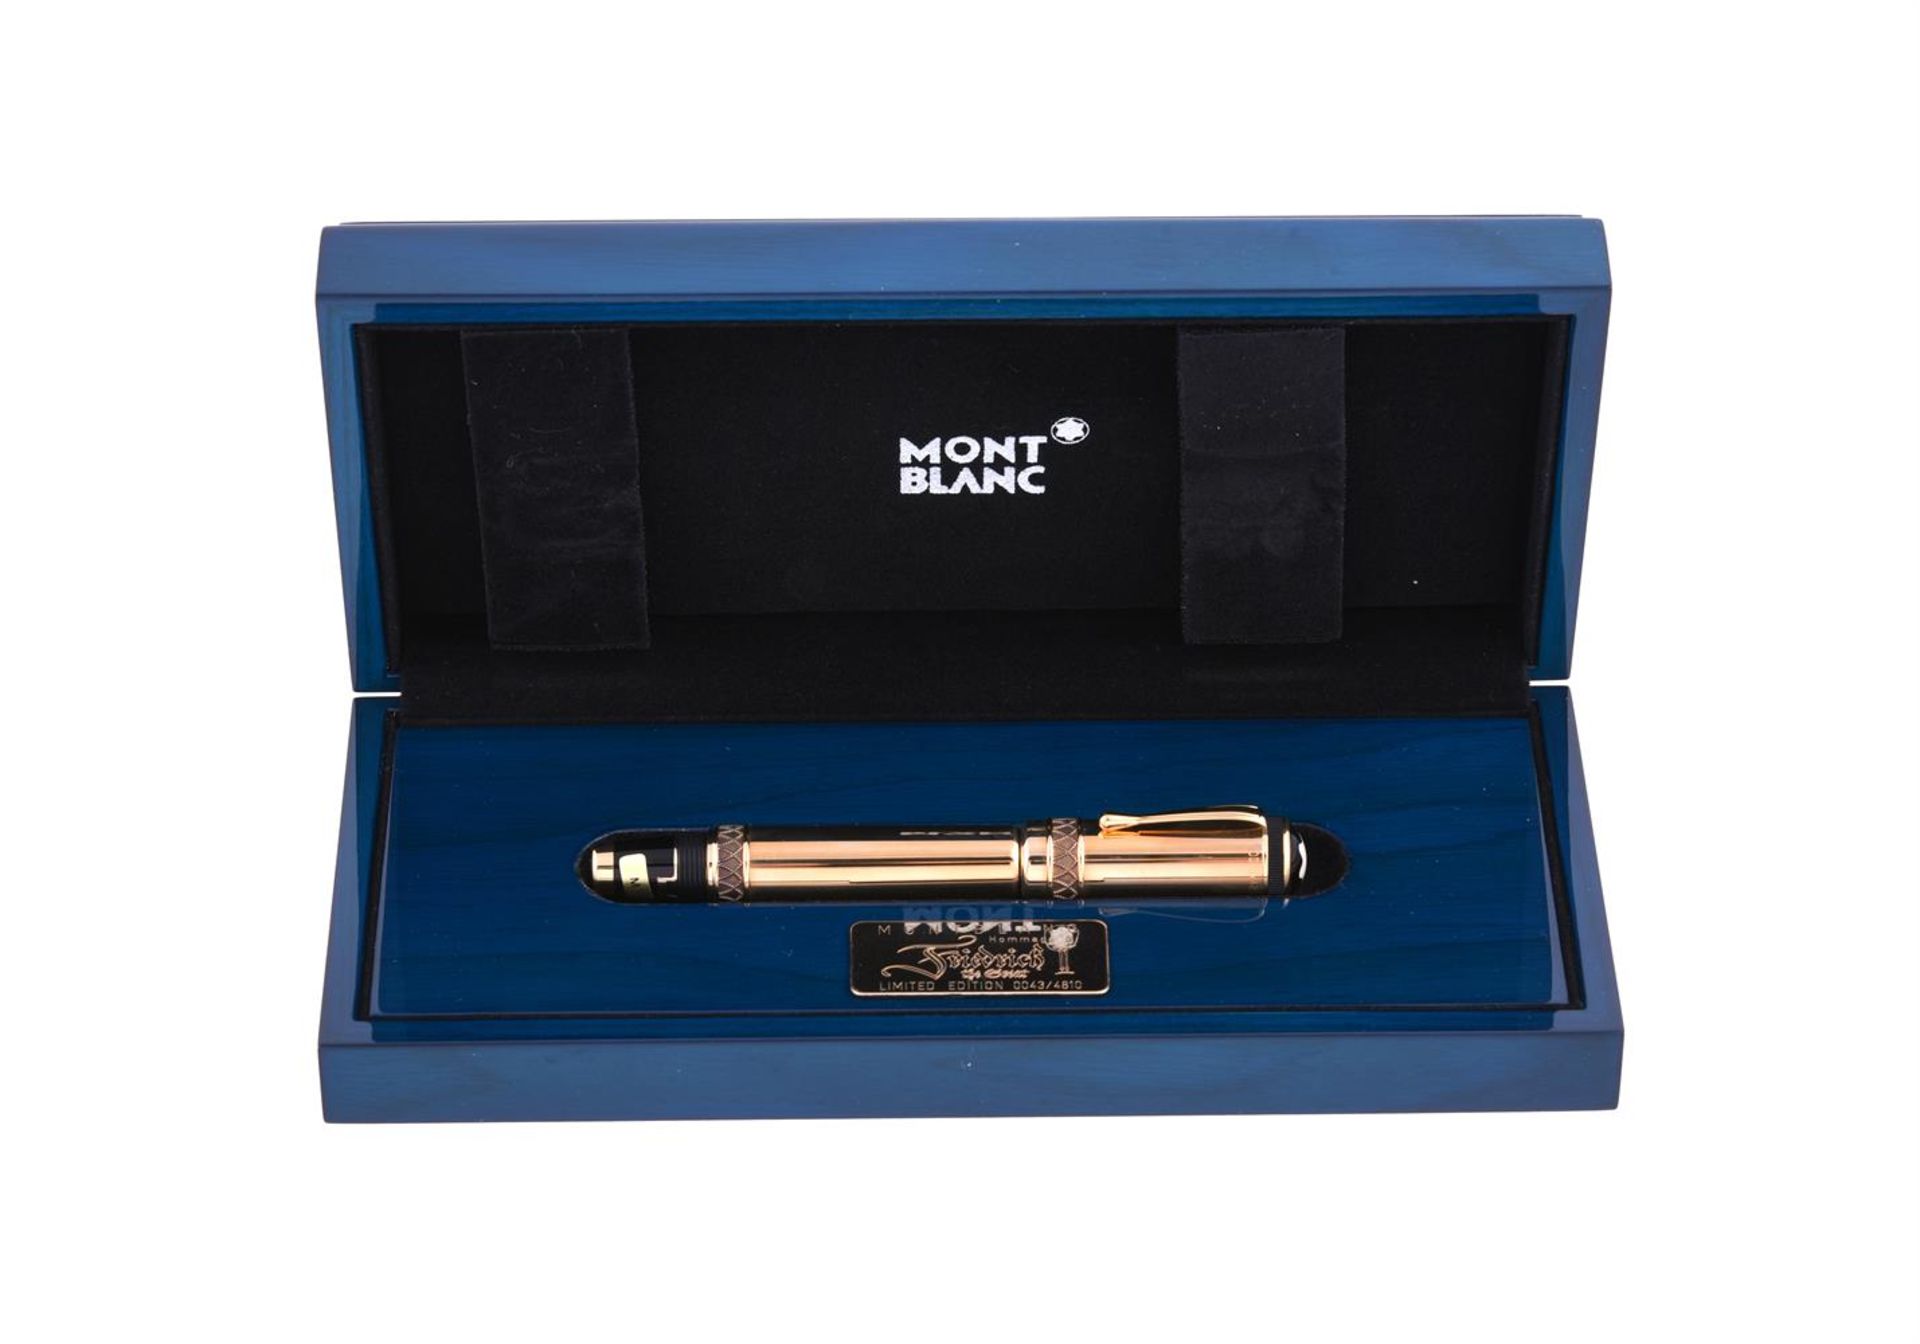 MONTBLANC, PATRON OF THE ARTS SERIES 4810, FRIEDRICH II THE GREAT, A LIMITED EDITION FOUNTAIN PEN - Bild 3 aus 3